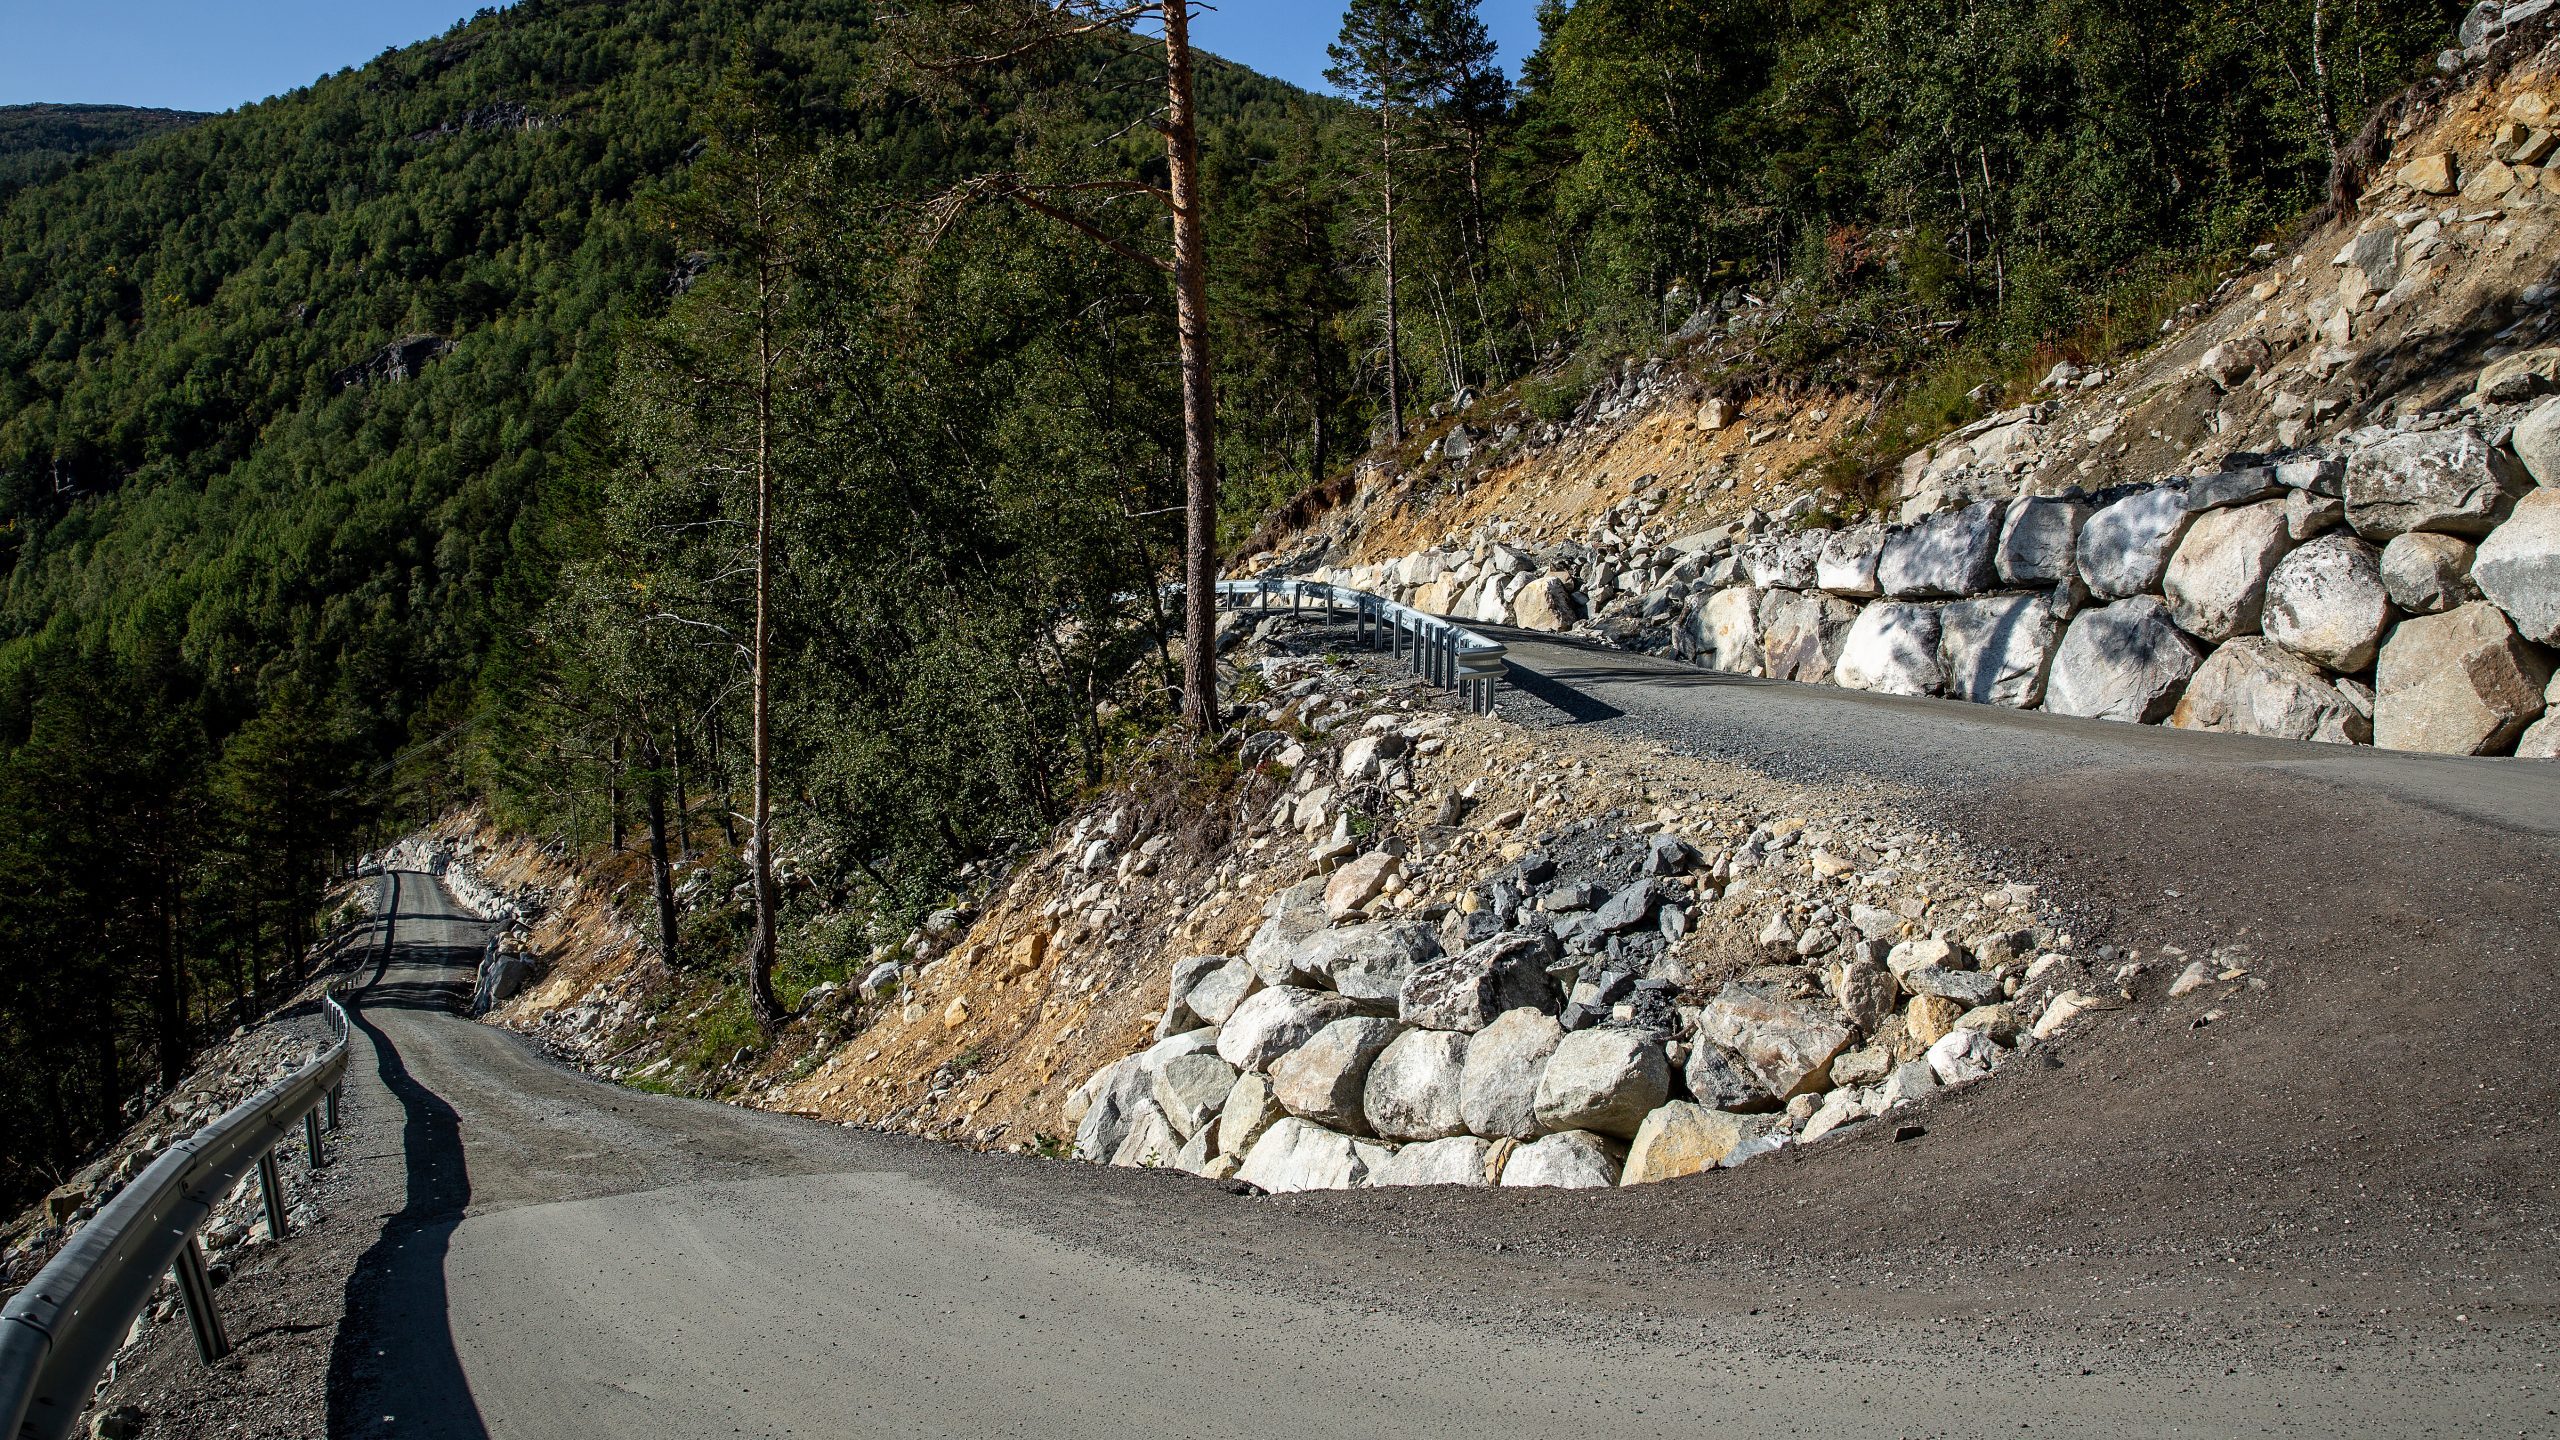 Steep gravel road in the mountains